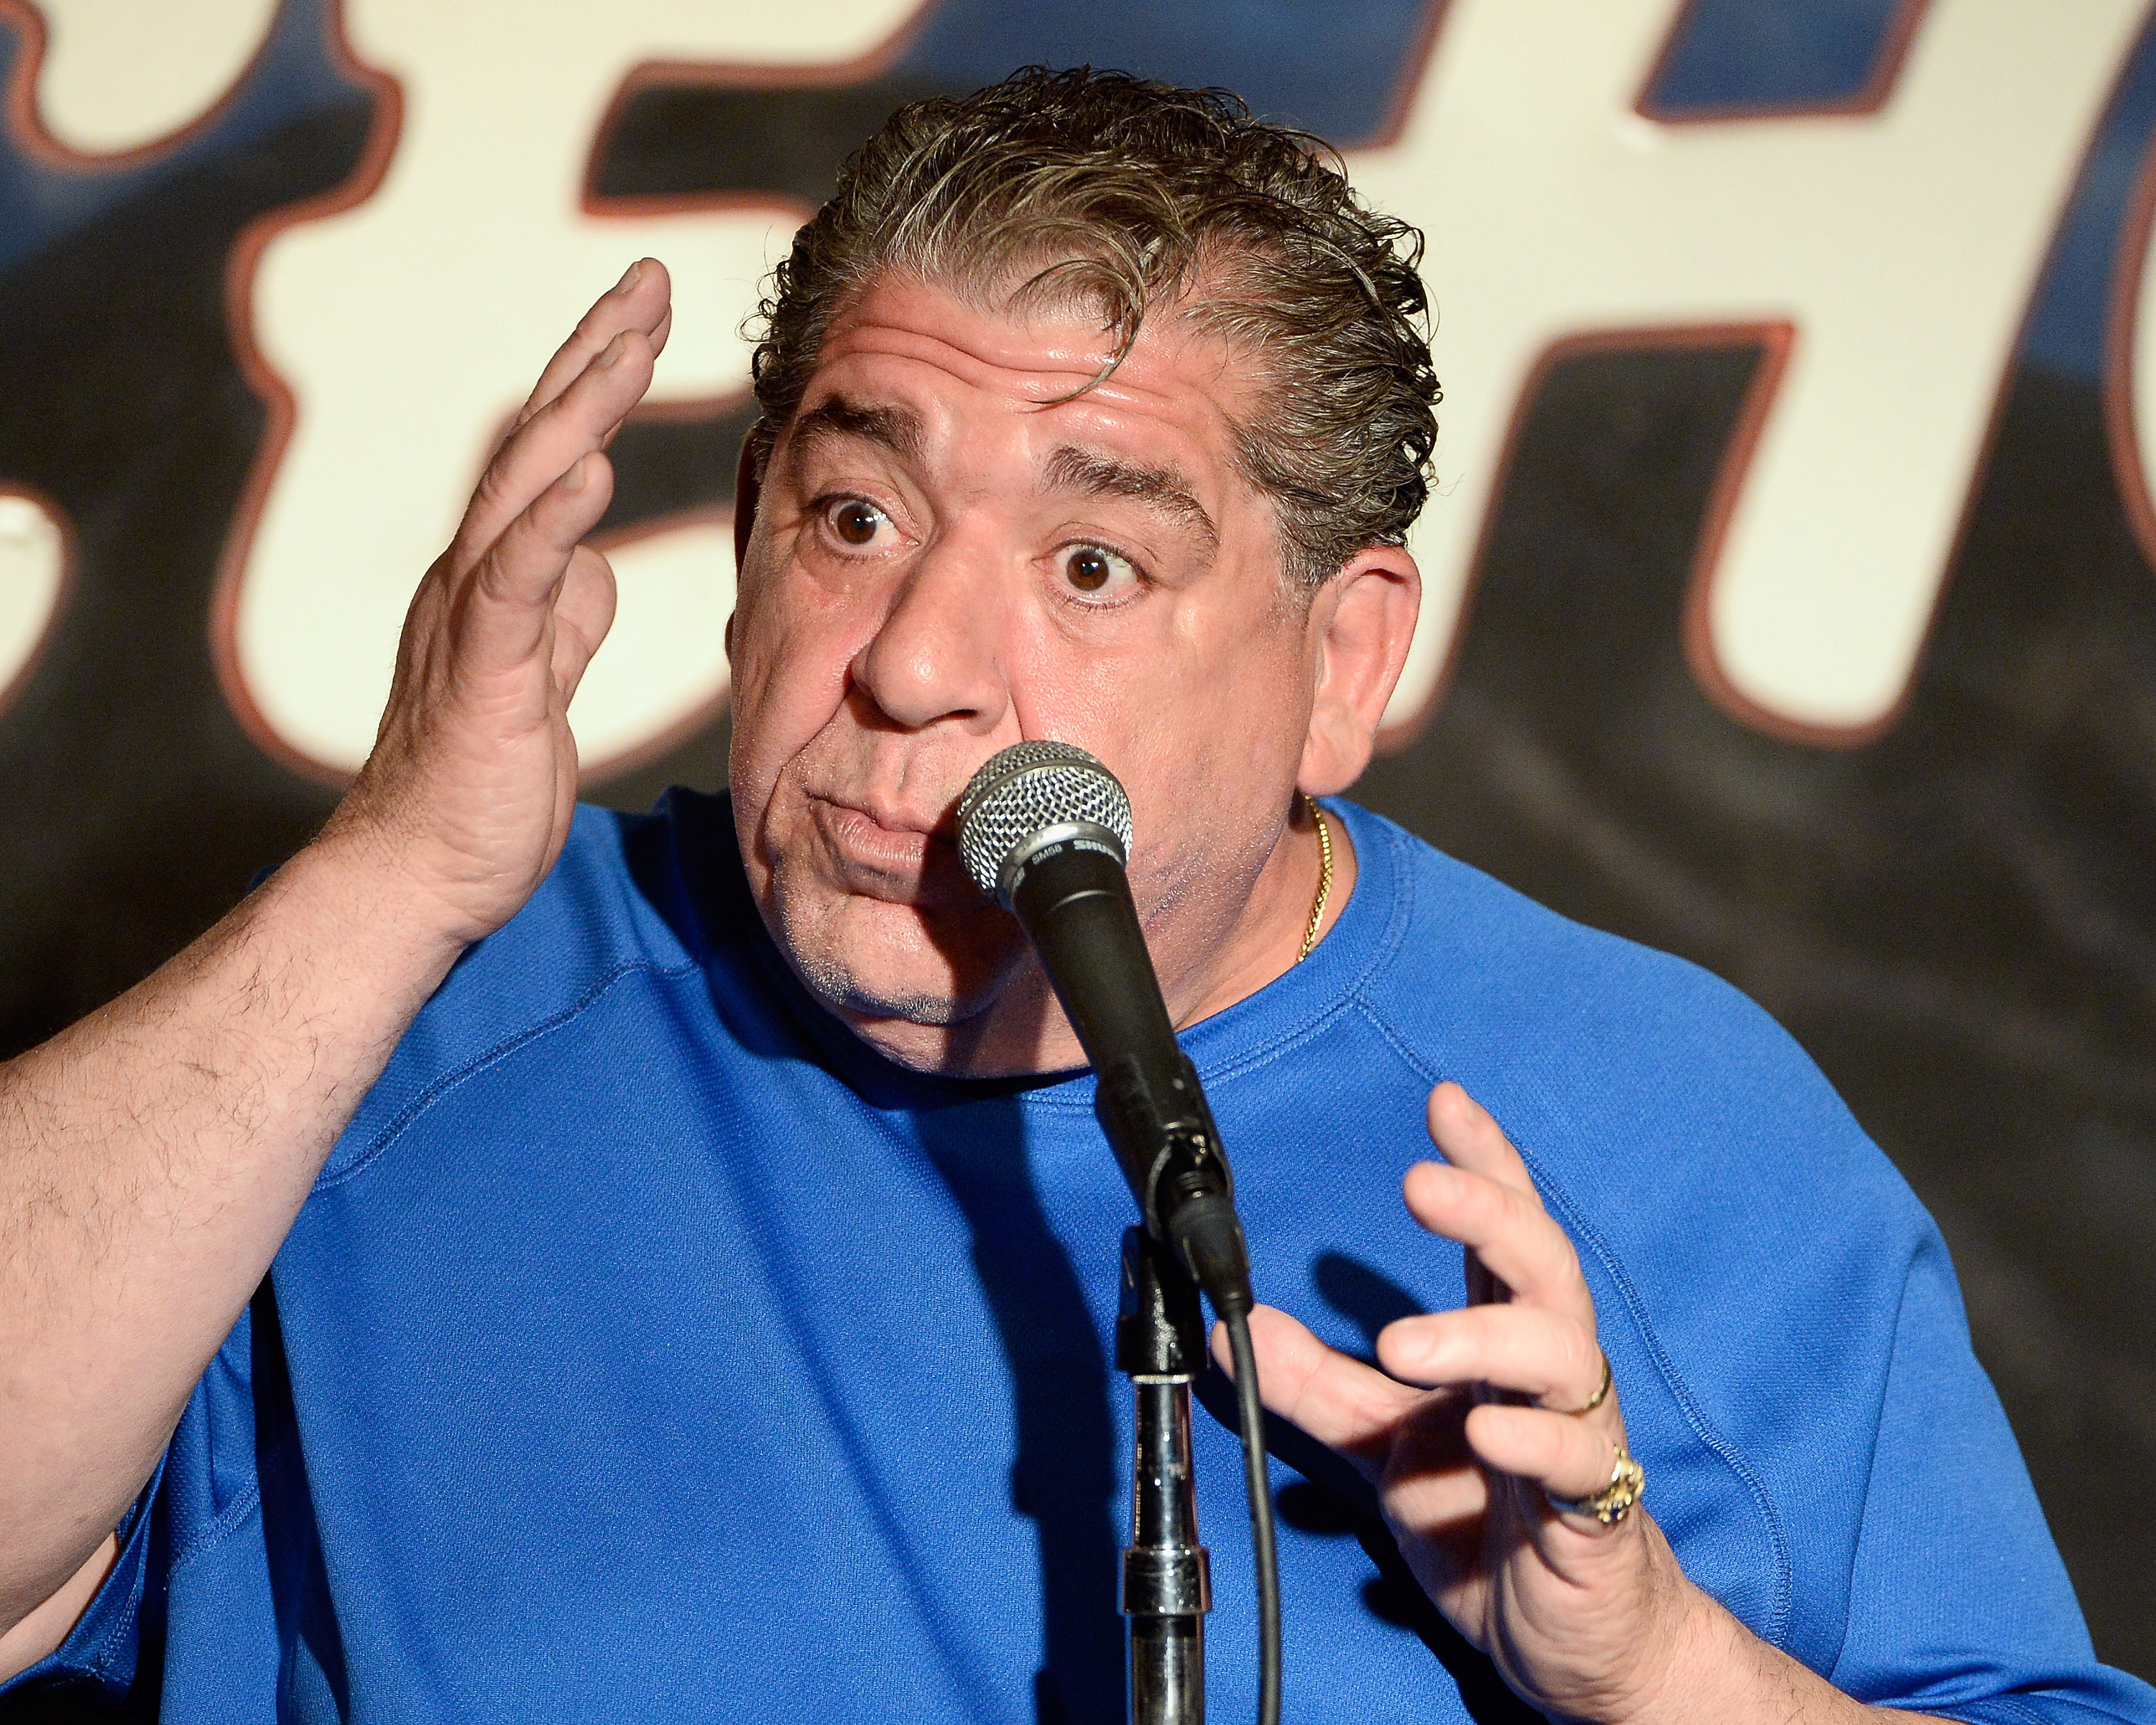 Joey Diaz during an appearance at The Ice House Comedy Club on August 19, 2015, in Pasadena, California. | Source: Getty Images